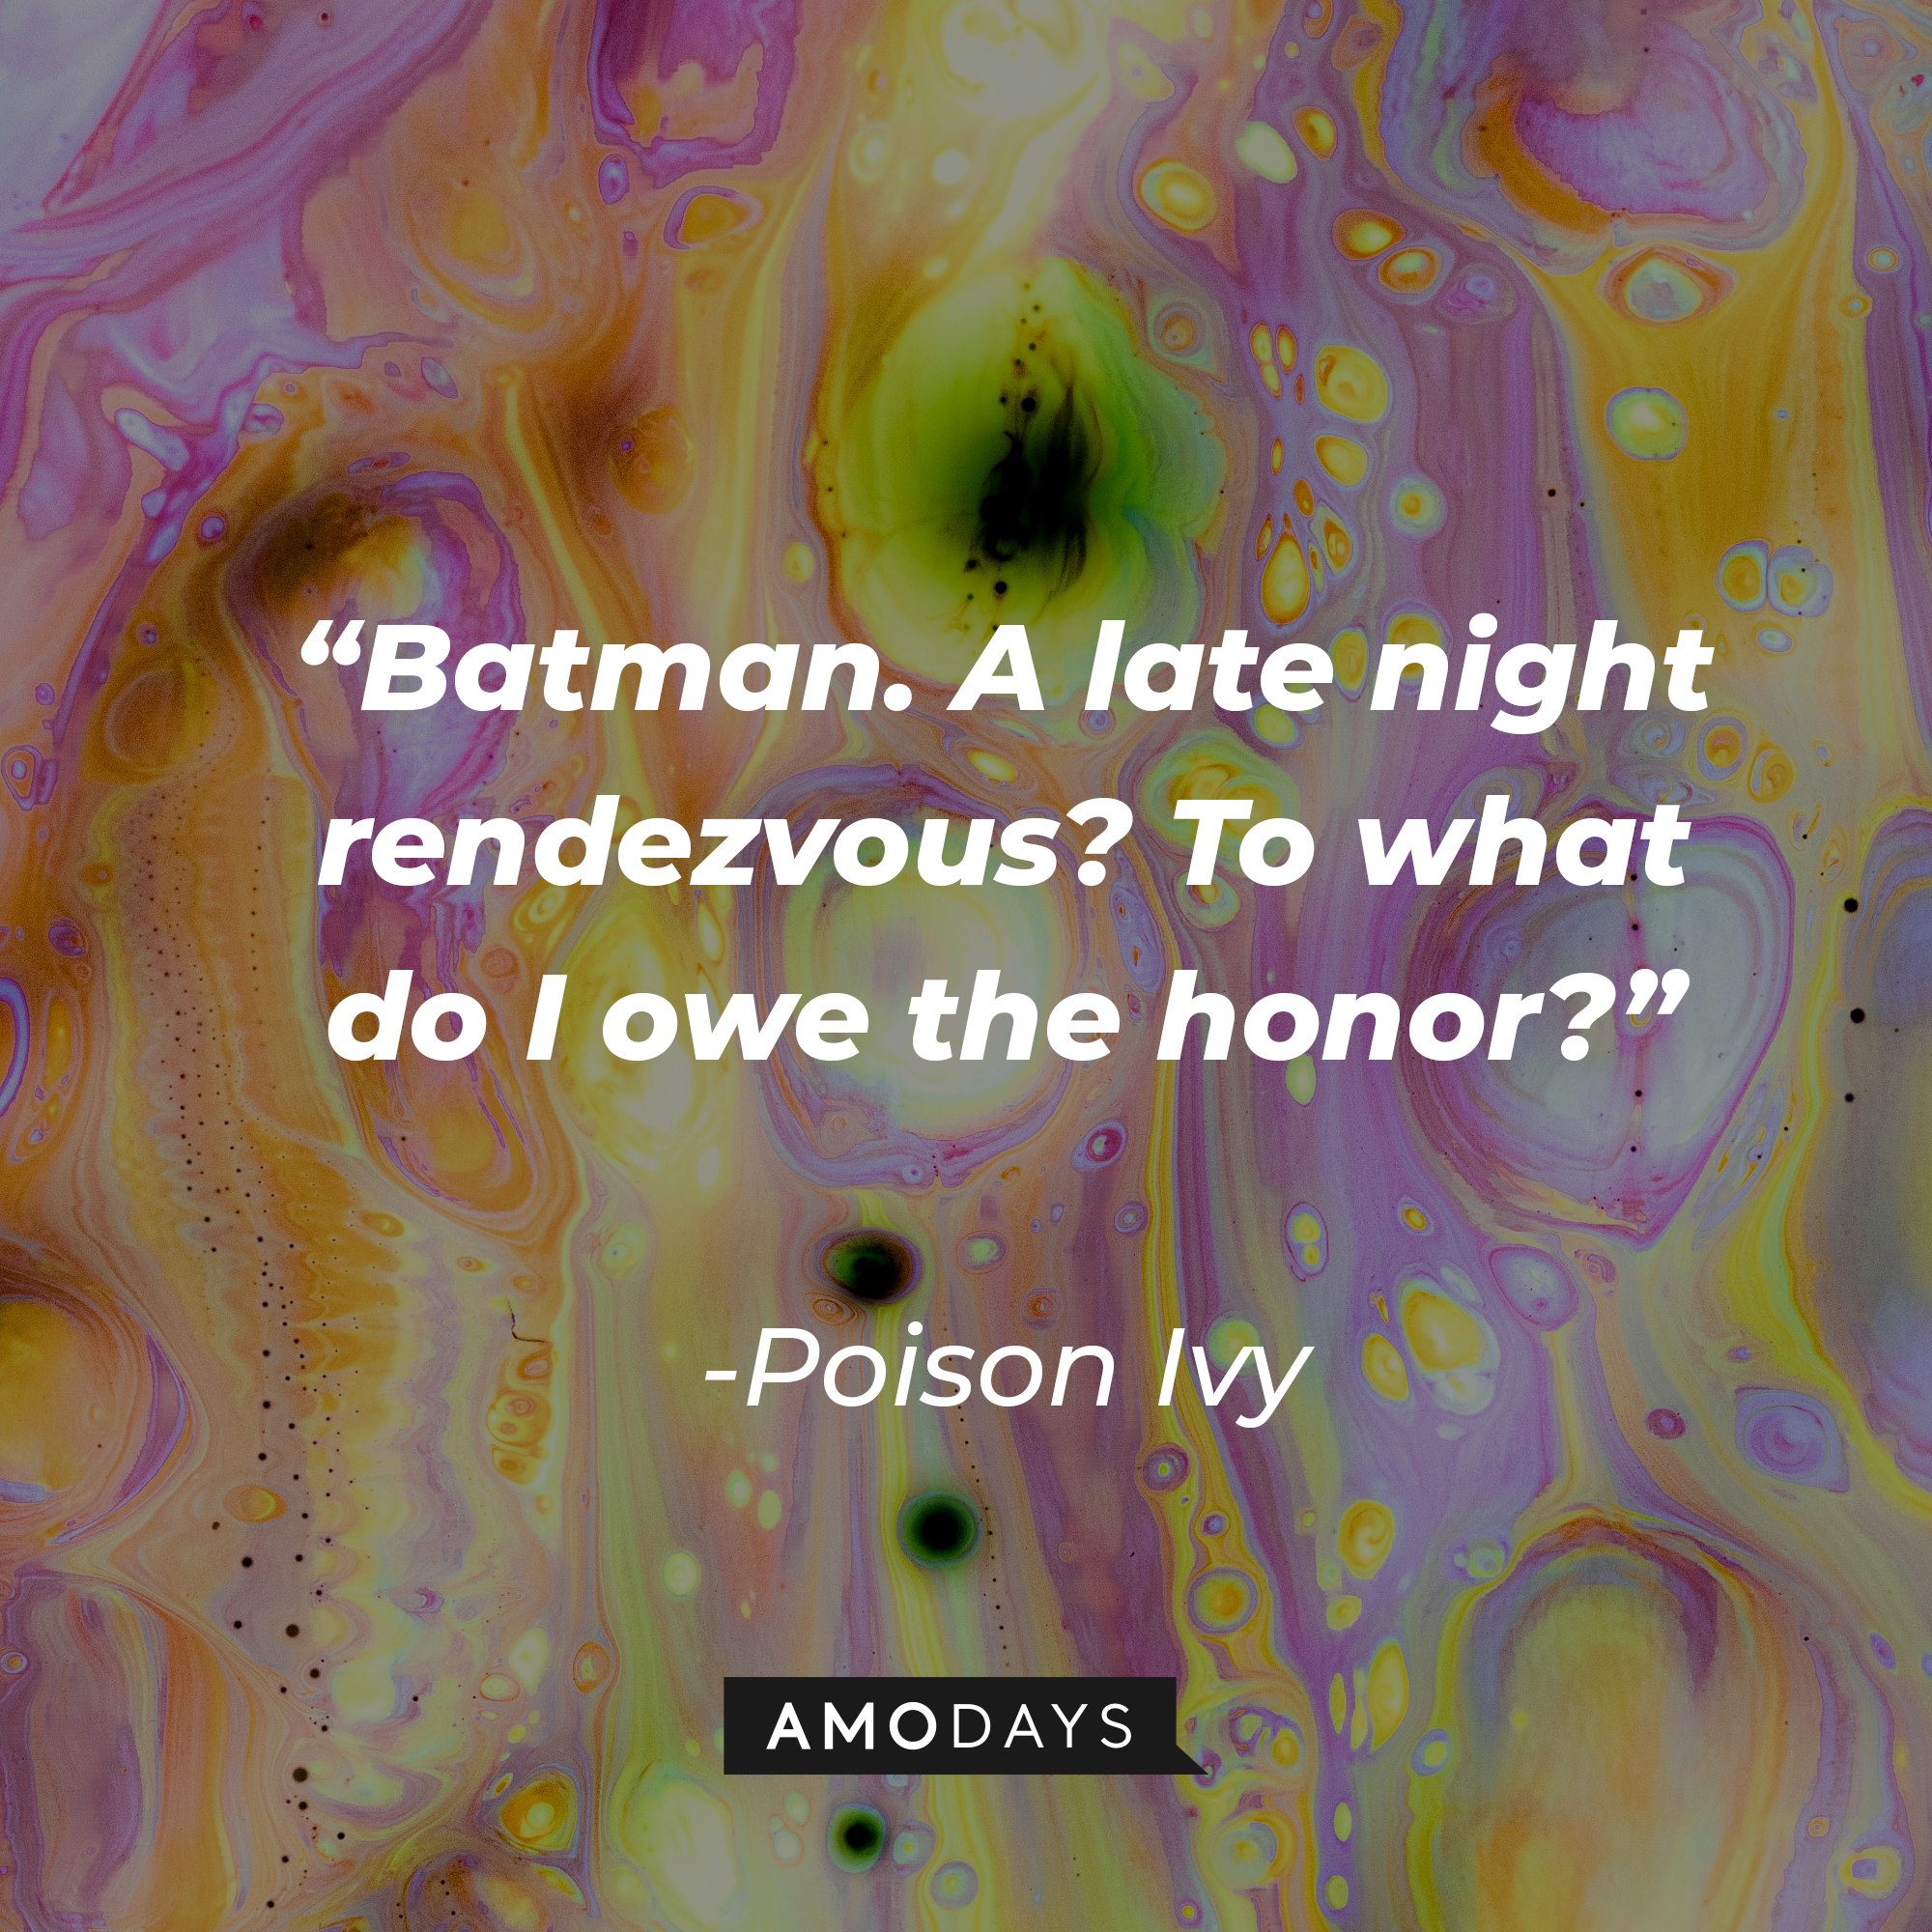 Poison Ivy’s quote: “Batman. A late night rendezvous? To what do I owe the honor?” | Image: Unsplash